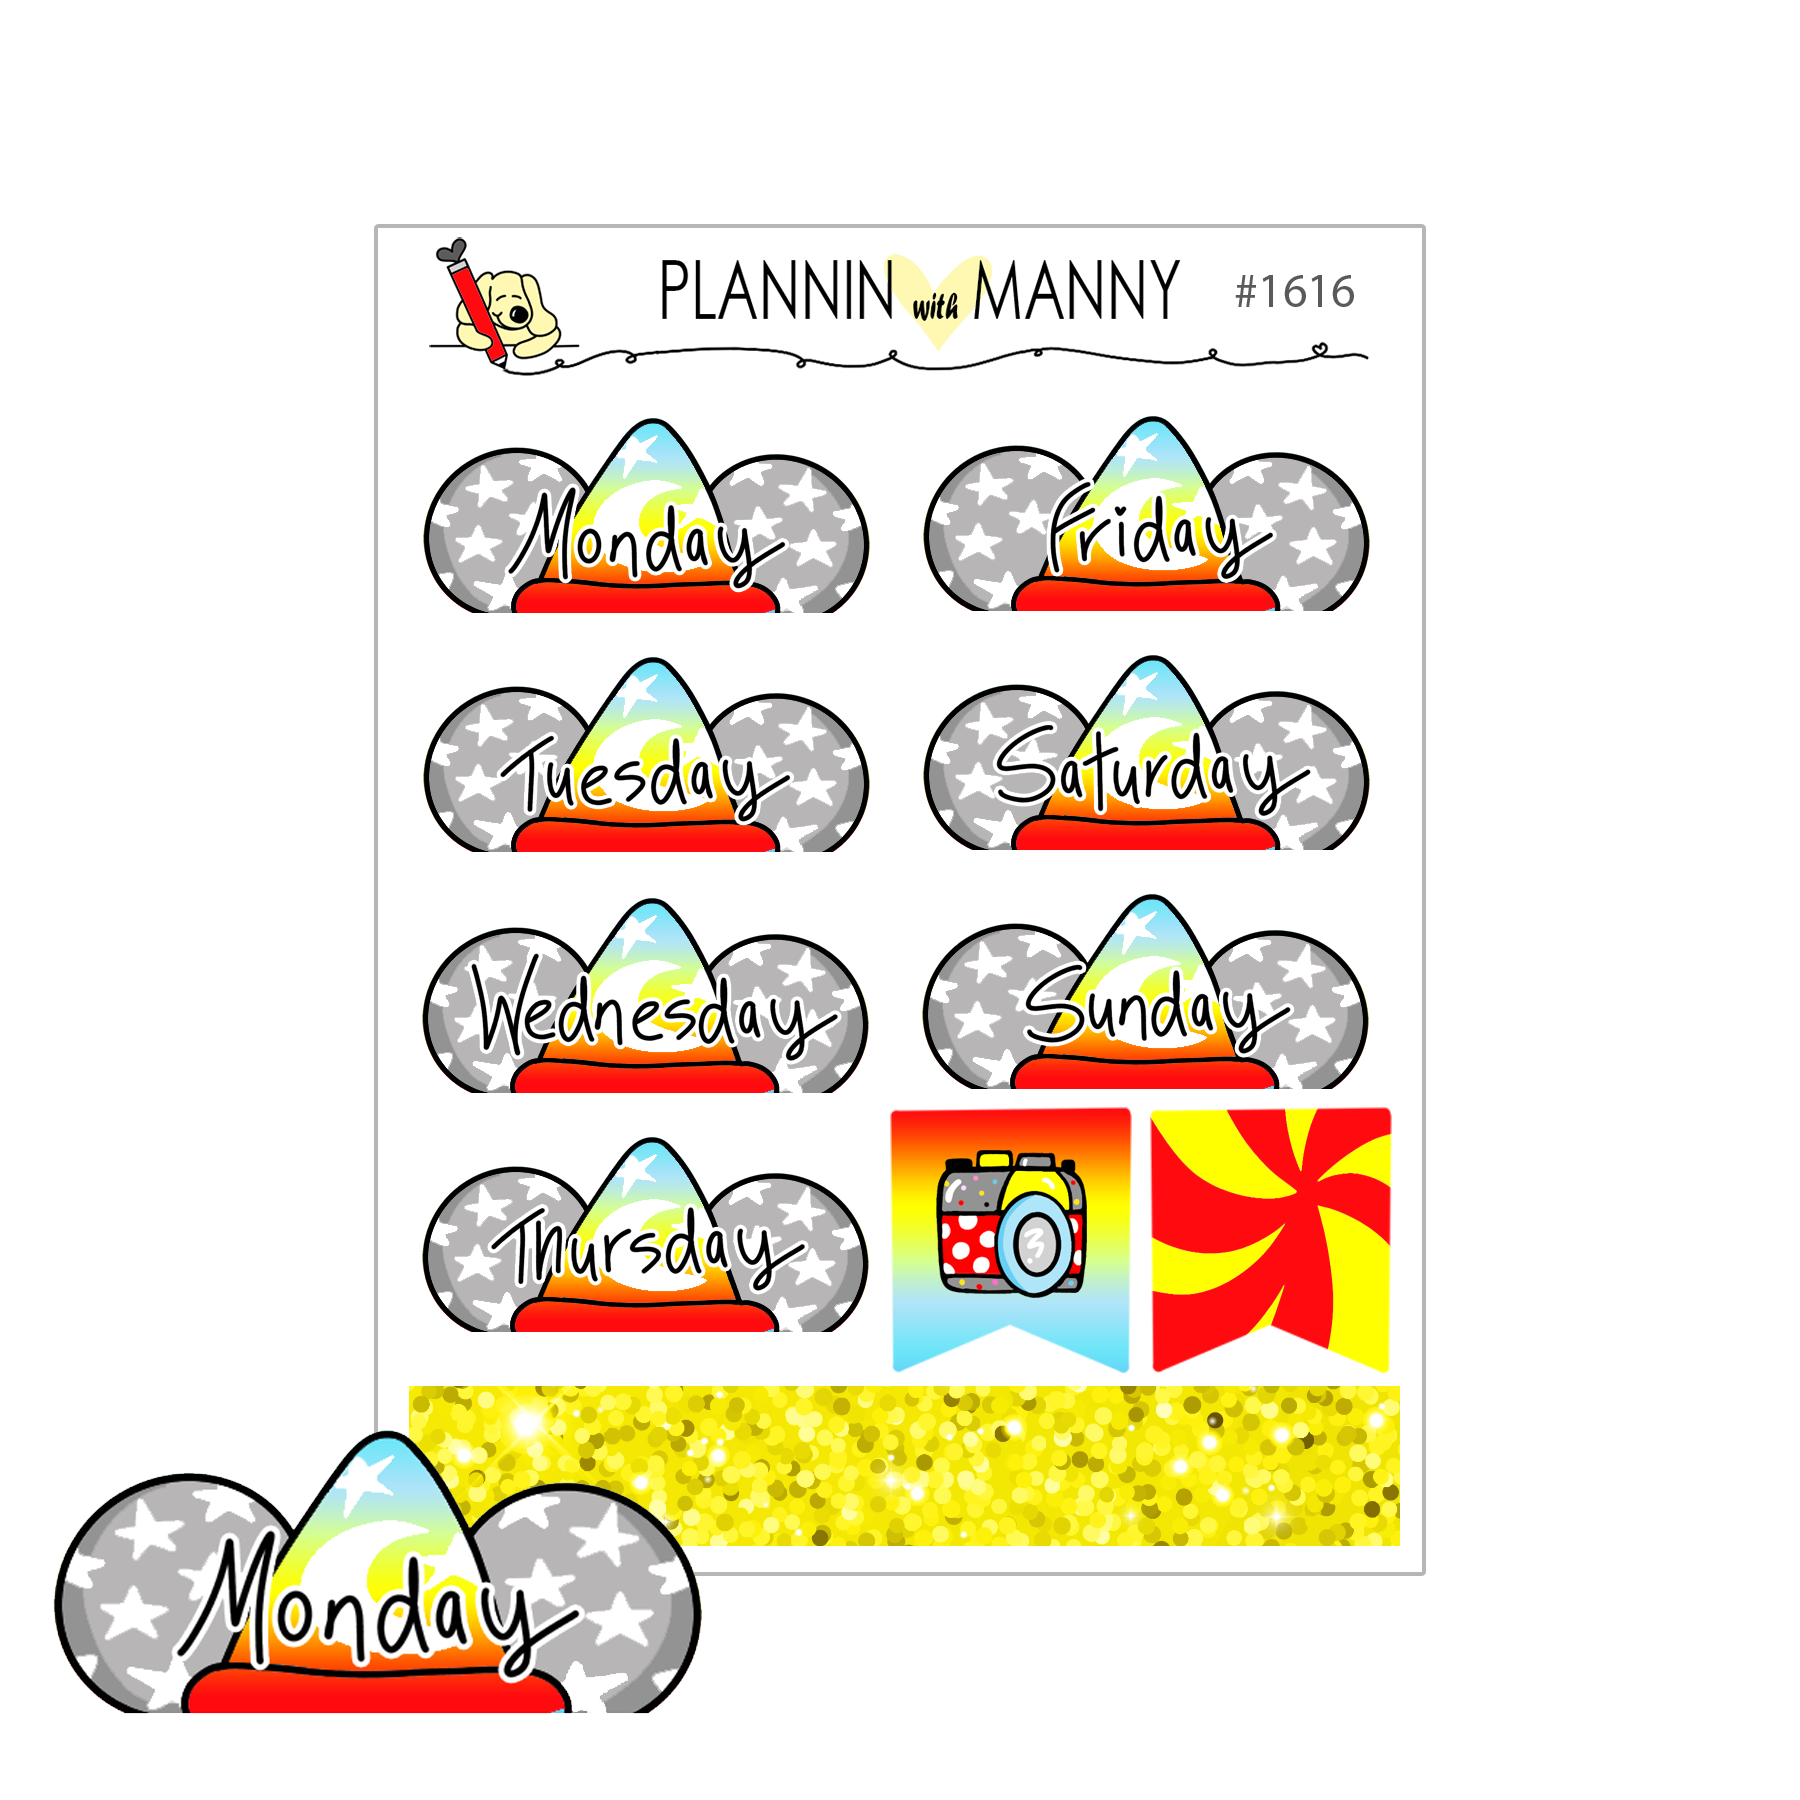 1616 Magic Hat Ear Date Cover Planner Stickers-Happy Place Collection